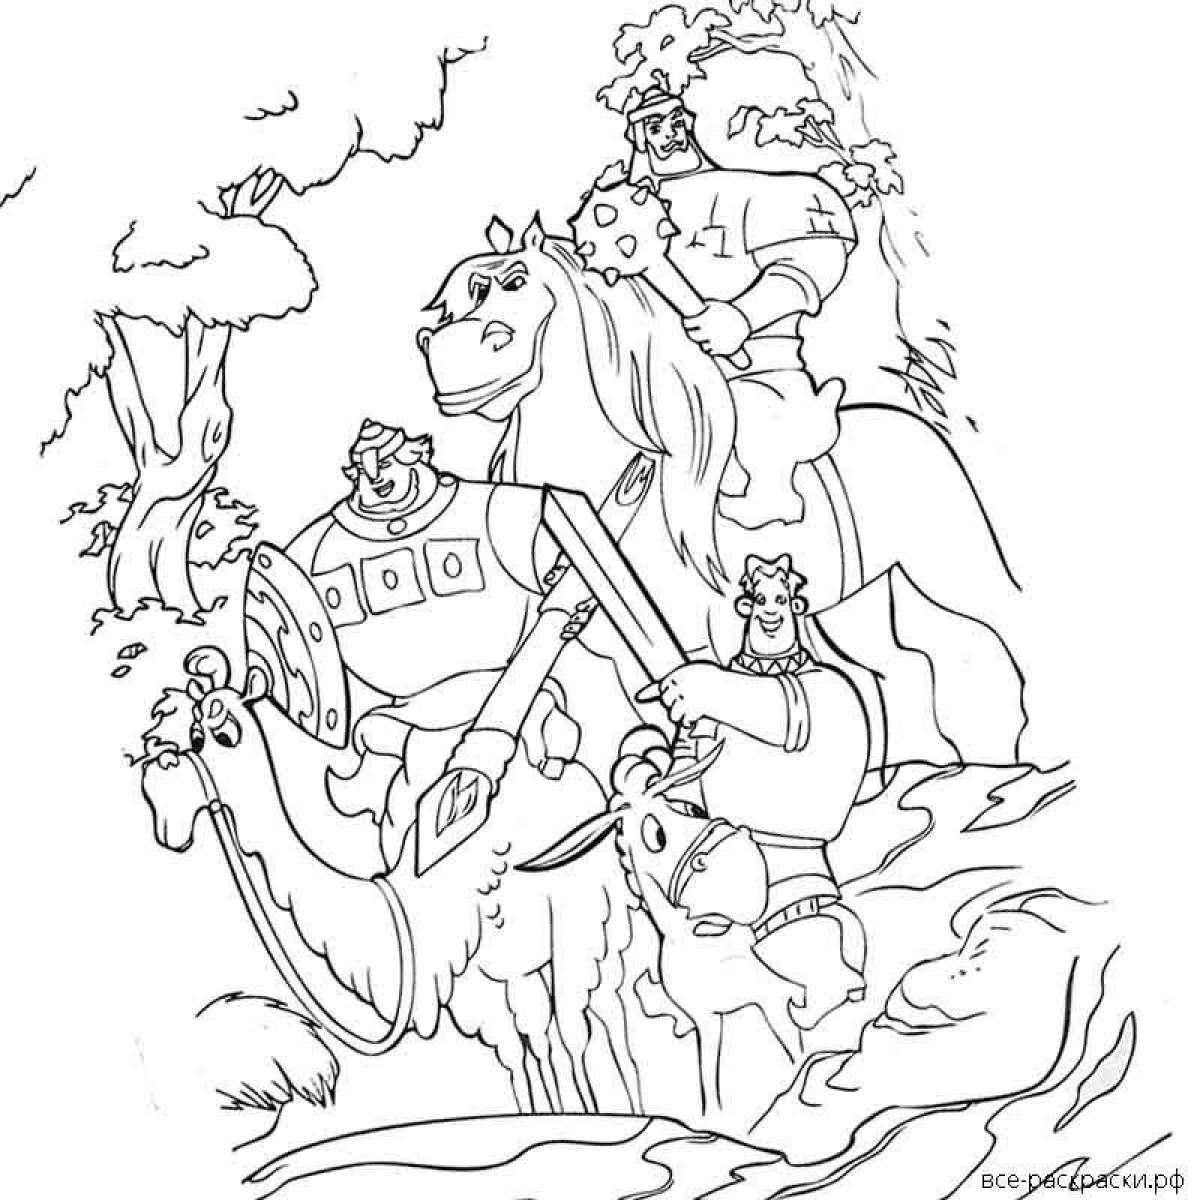 Funny coloring page 3 heroes